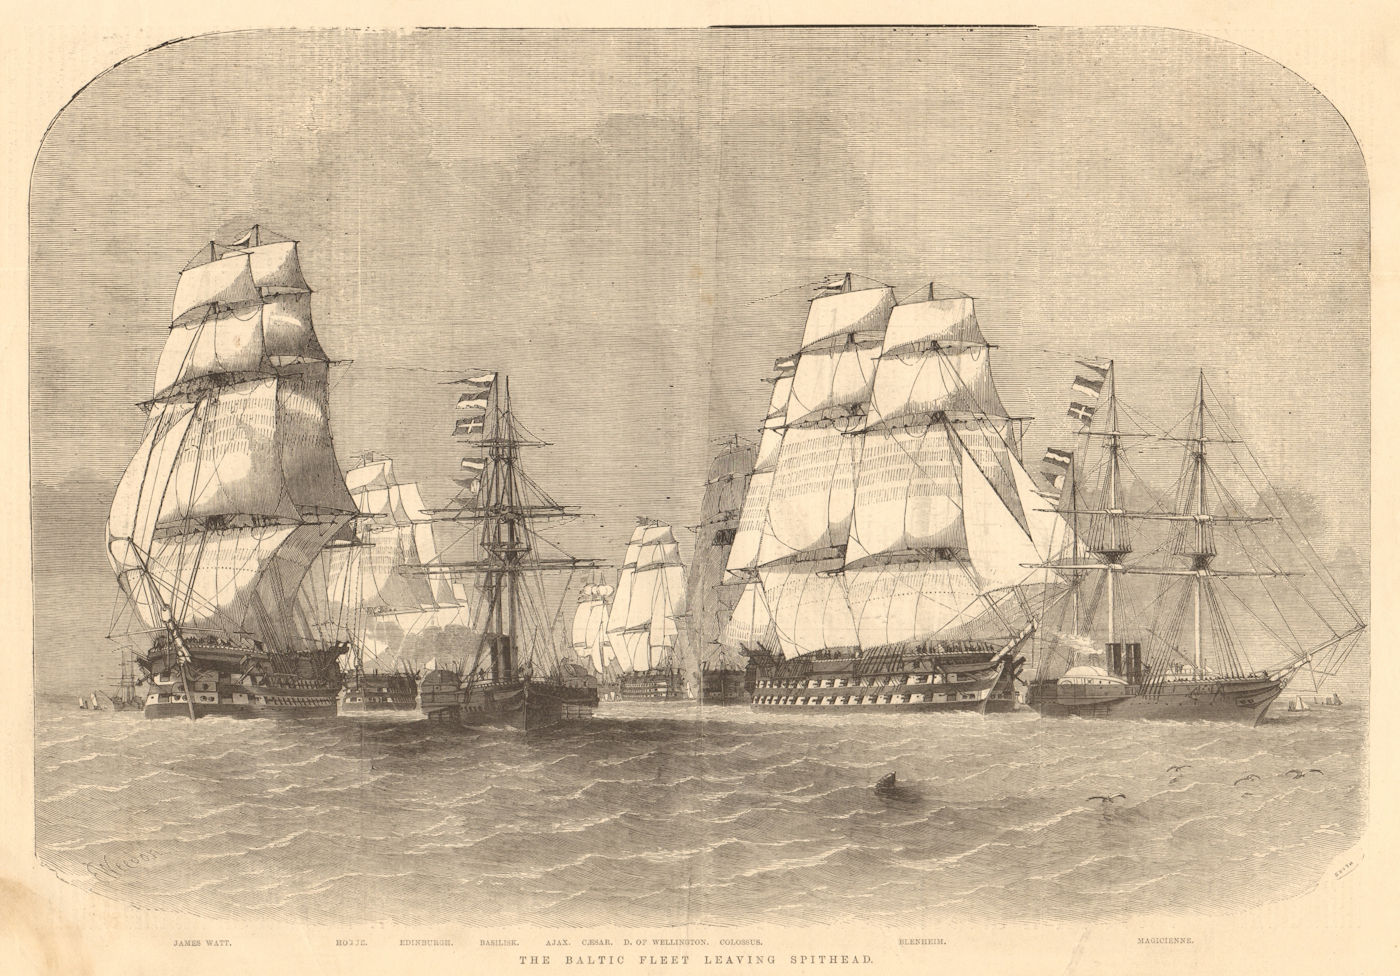 Associate Product The Baltic Fleet leaving Spithead. Hampshire. Ships 1855 antique ILN full page